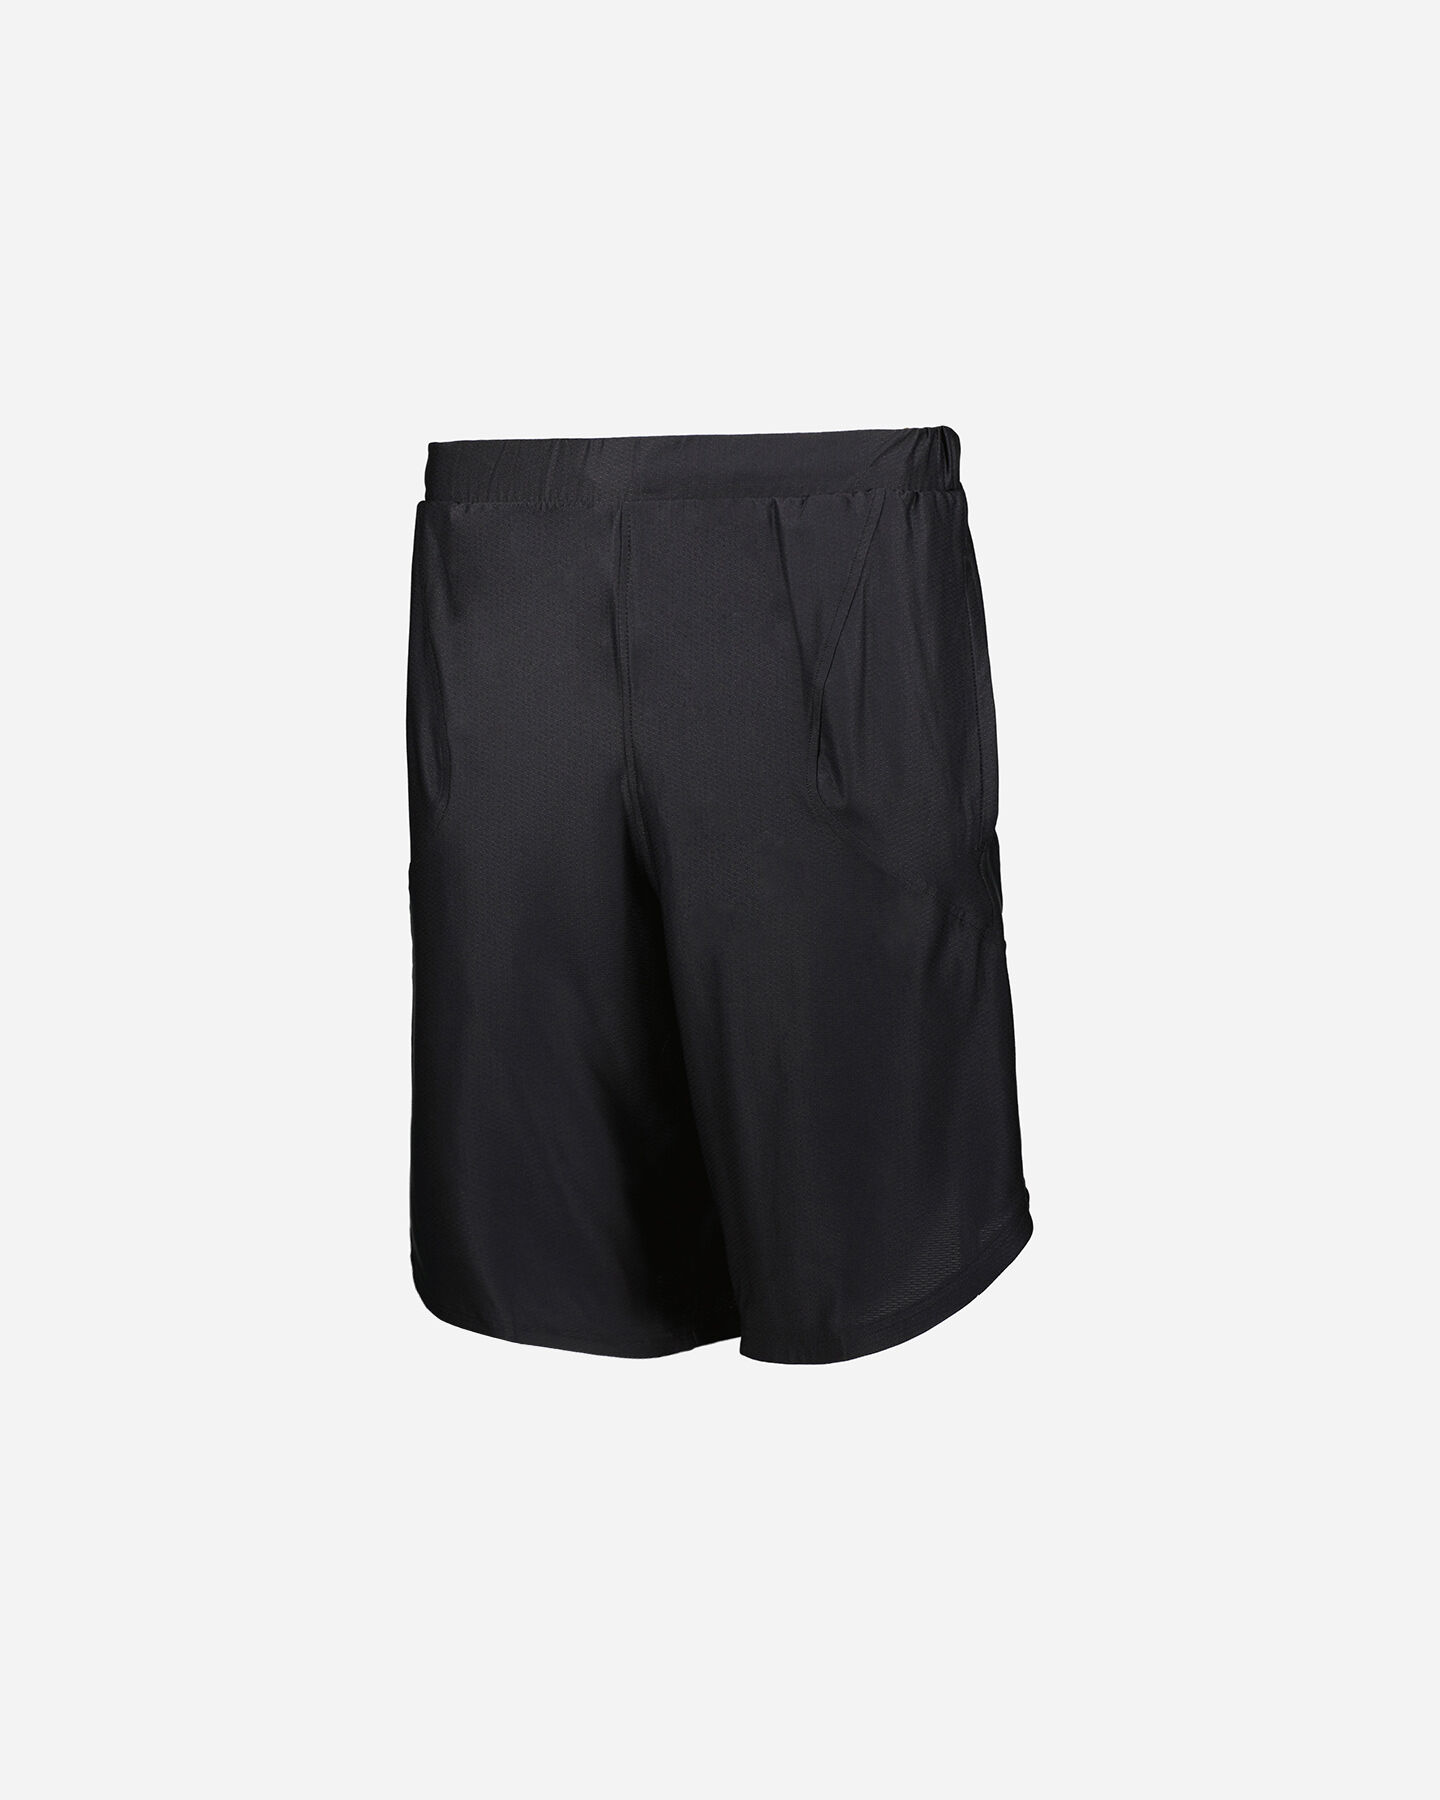  Pantaloncini basket UNDER ARMOUR ELEVATED PERFORMANCE M S5229452 scatto 0